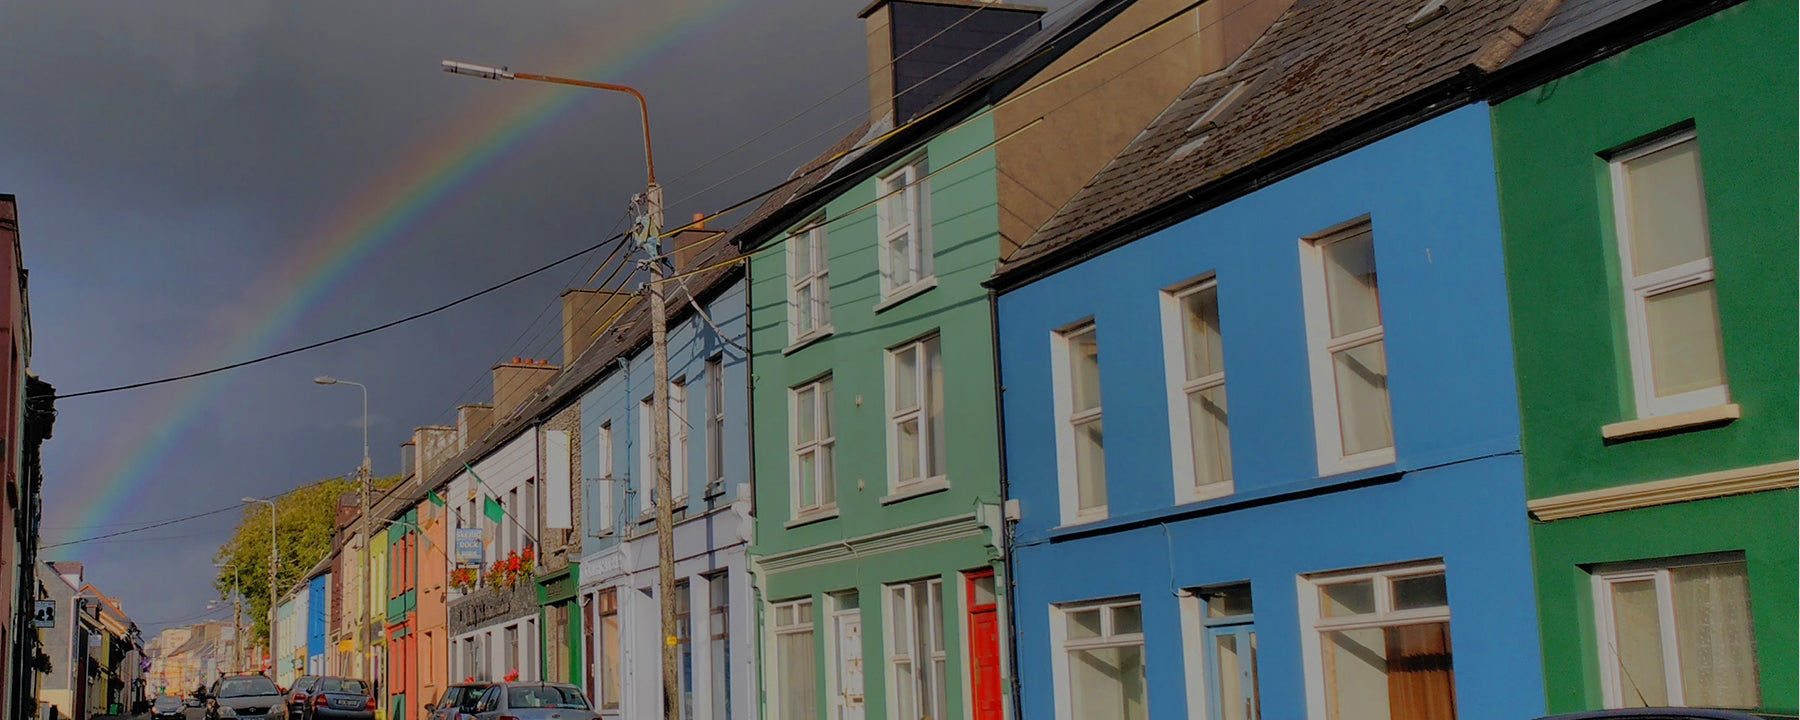 A terrace of colourful houses in Brighton & Hove, framed by a rainbow in the sky